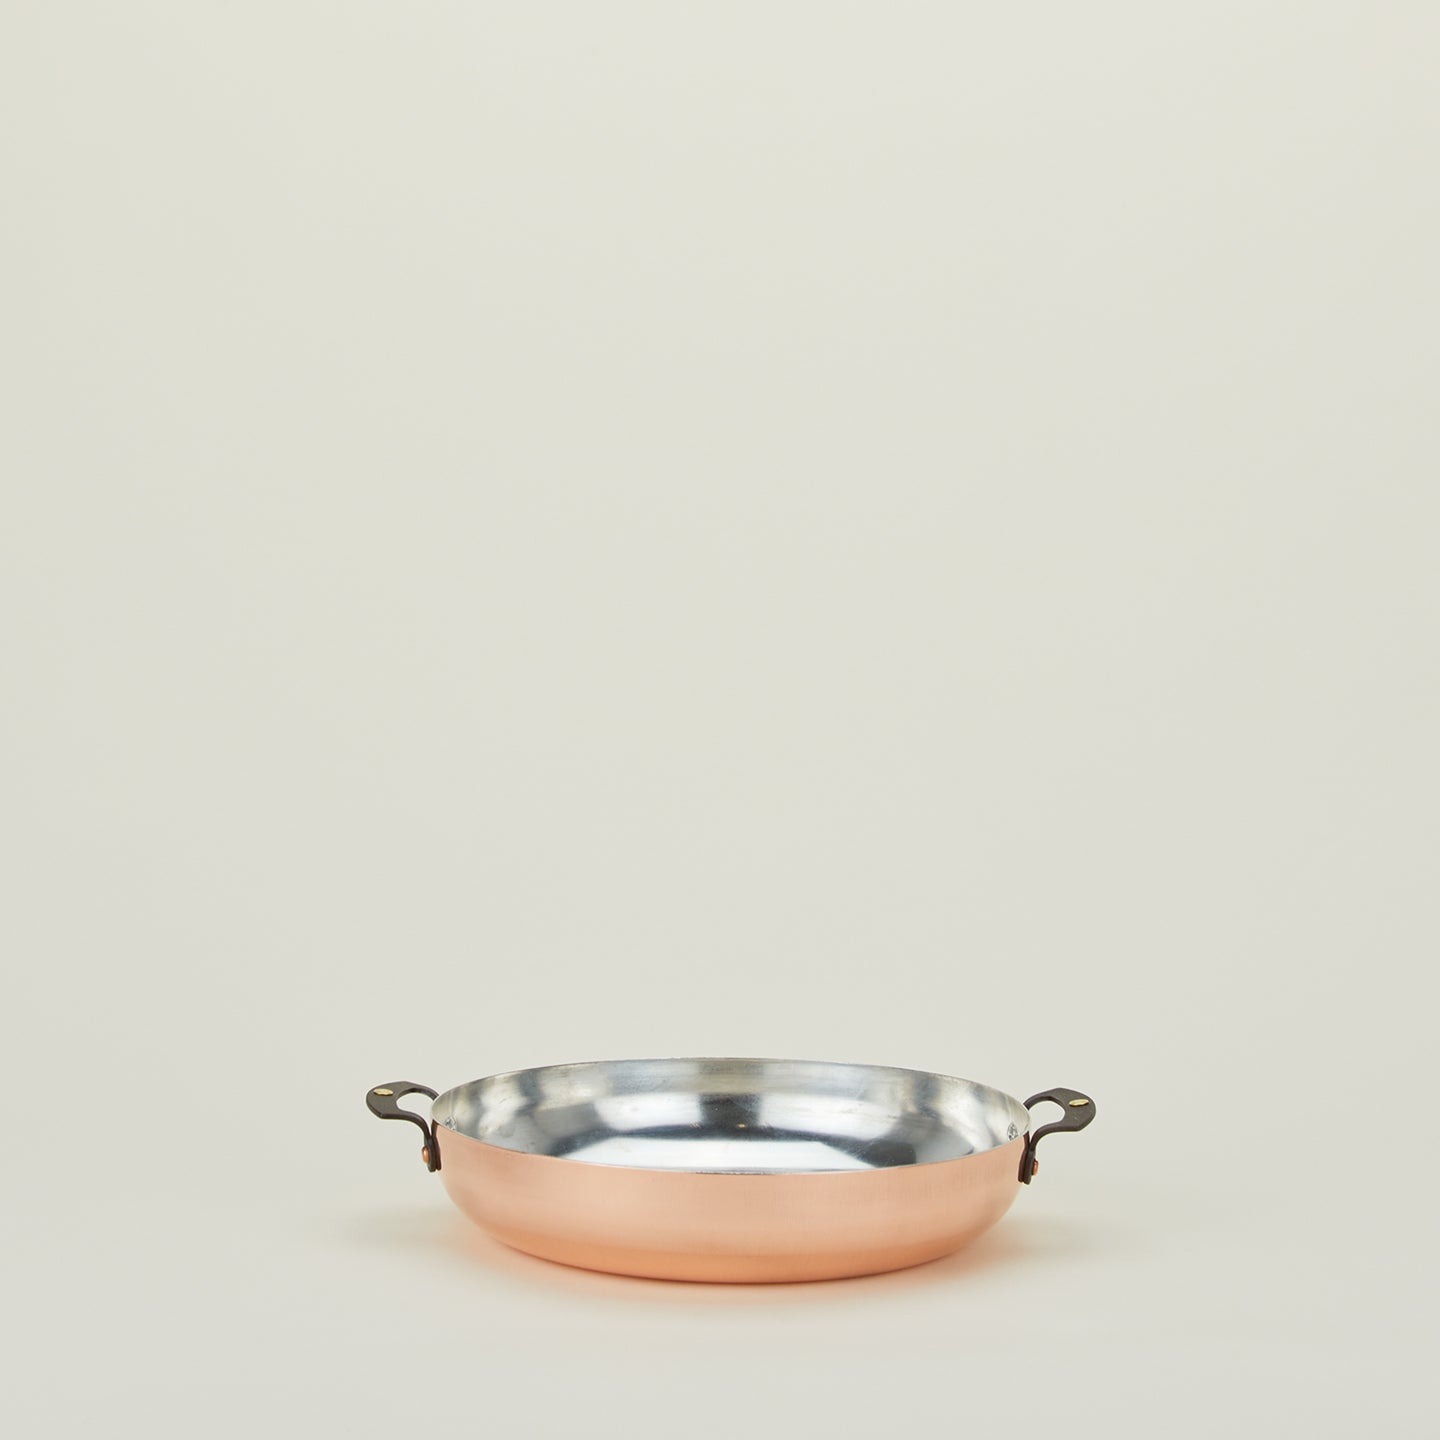 Copper Two Handled Saute Pan, 11"